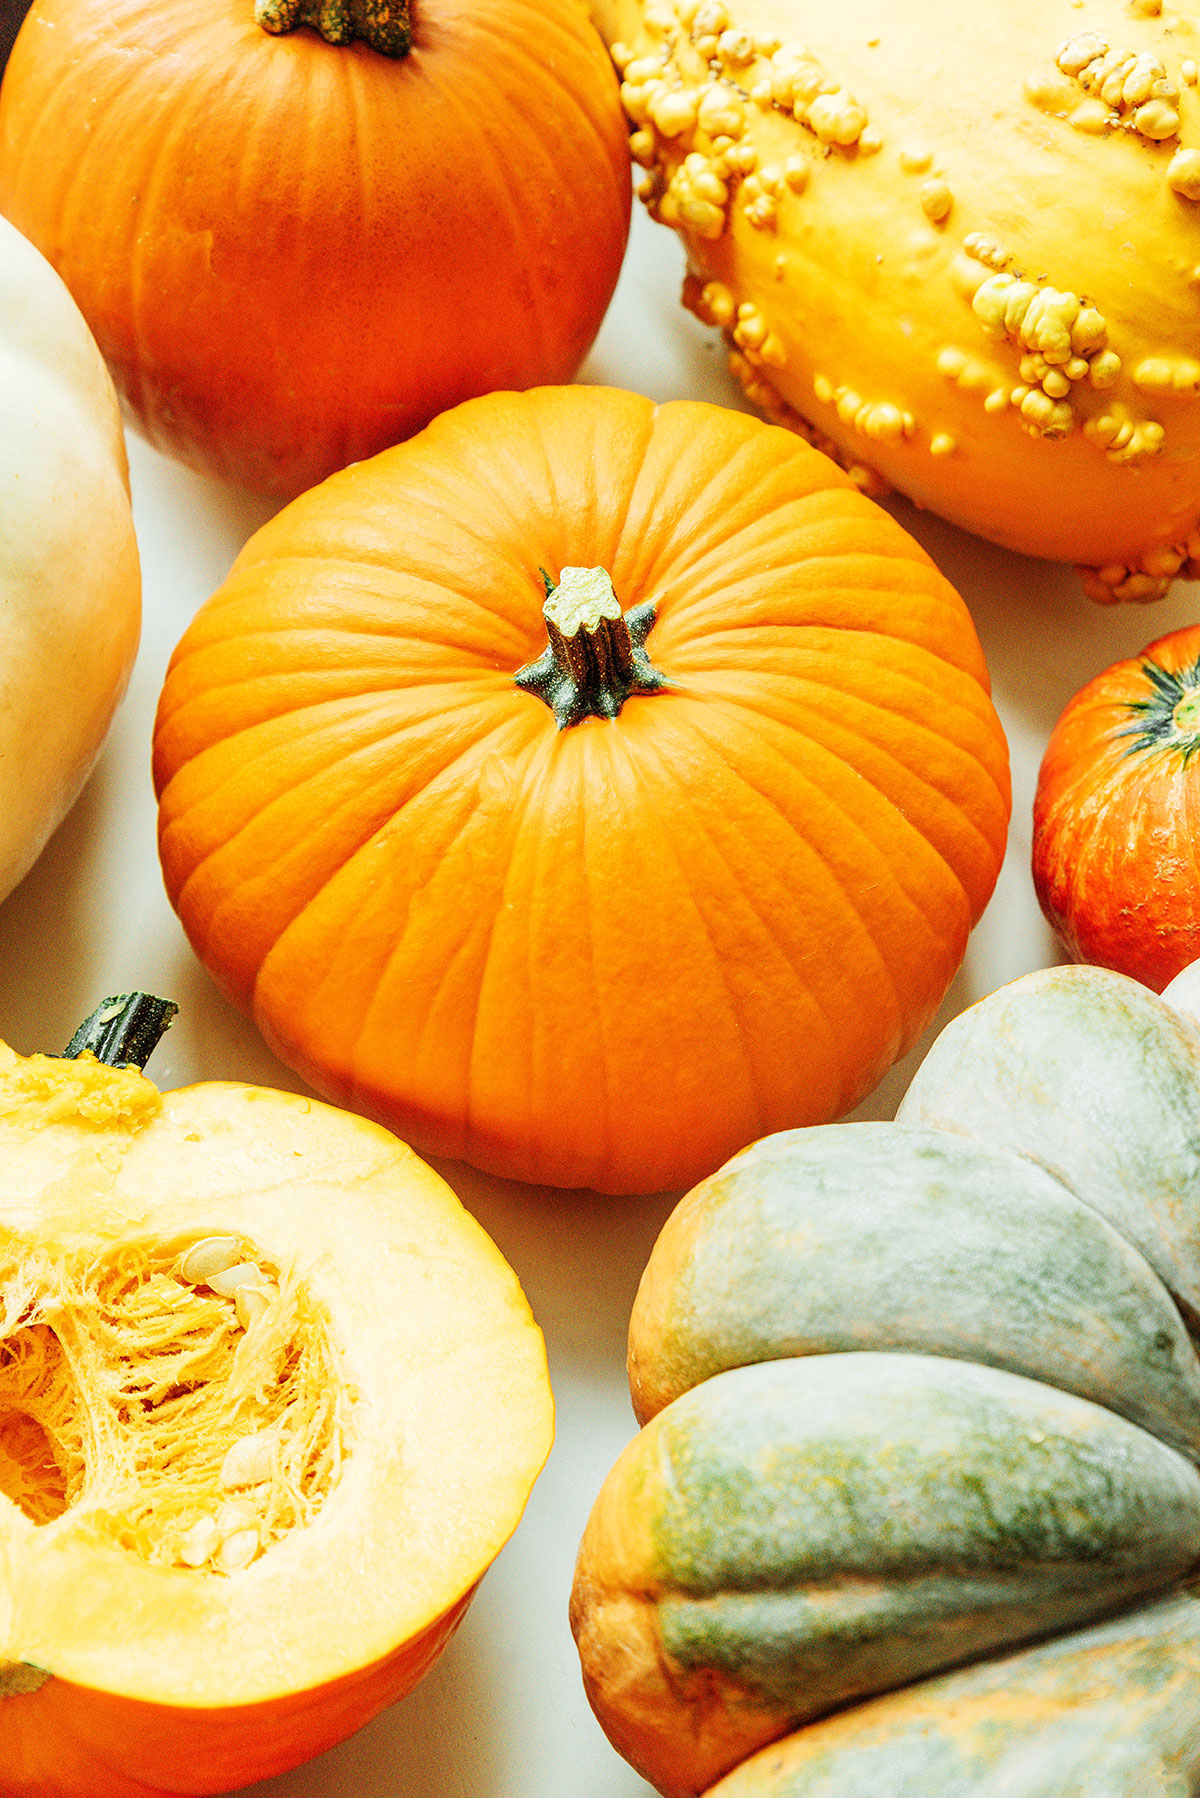 Many types of pumpkins.